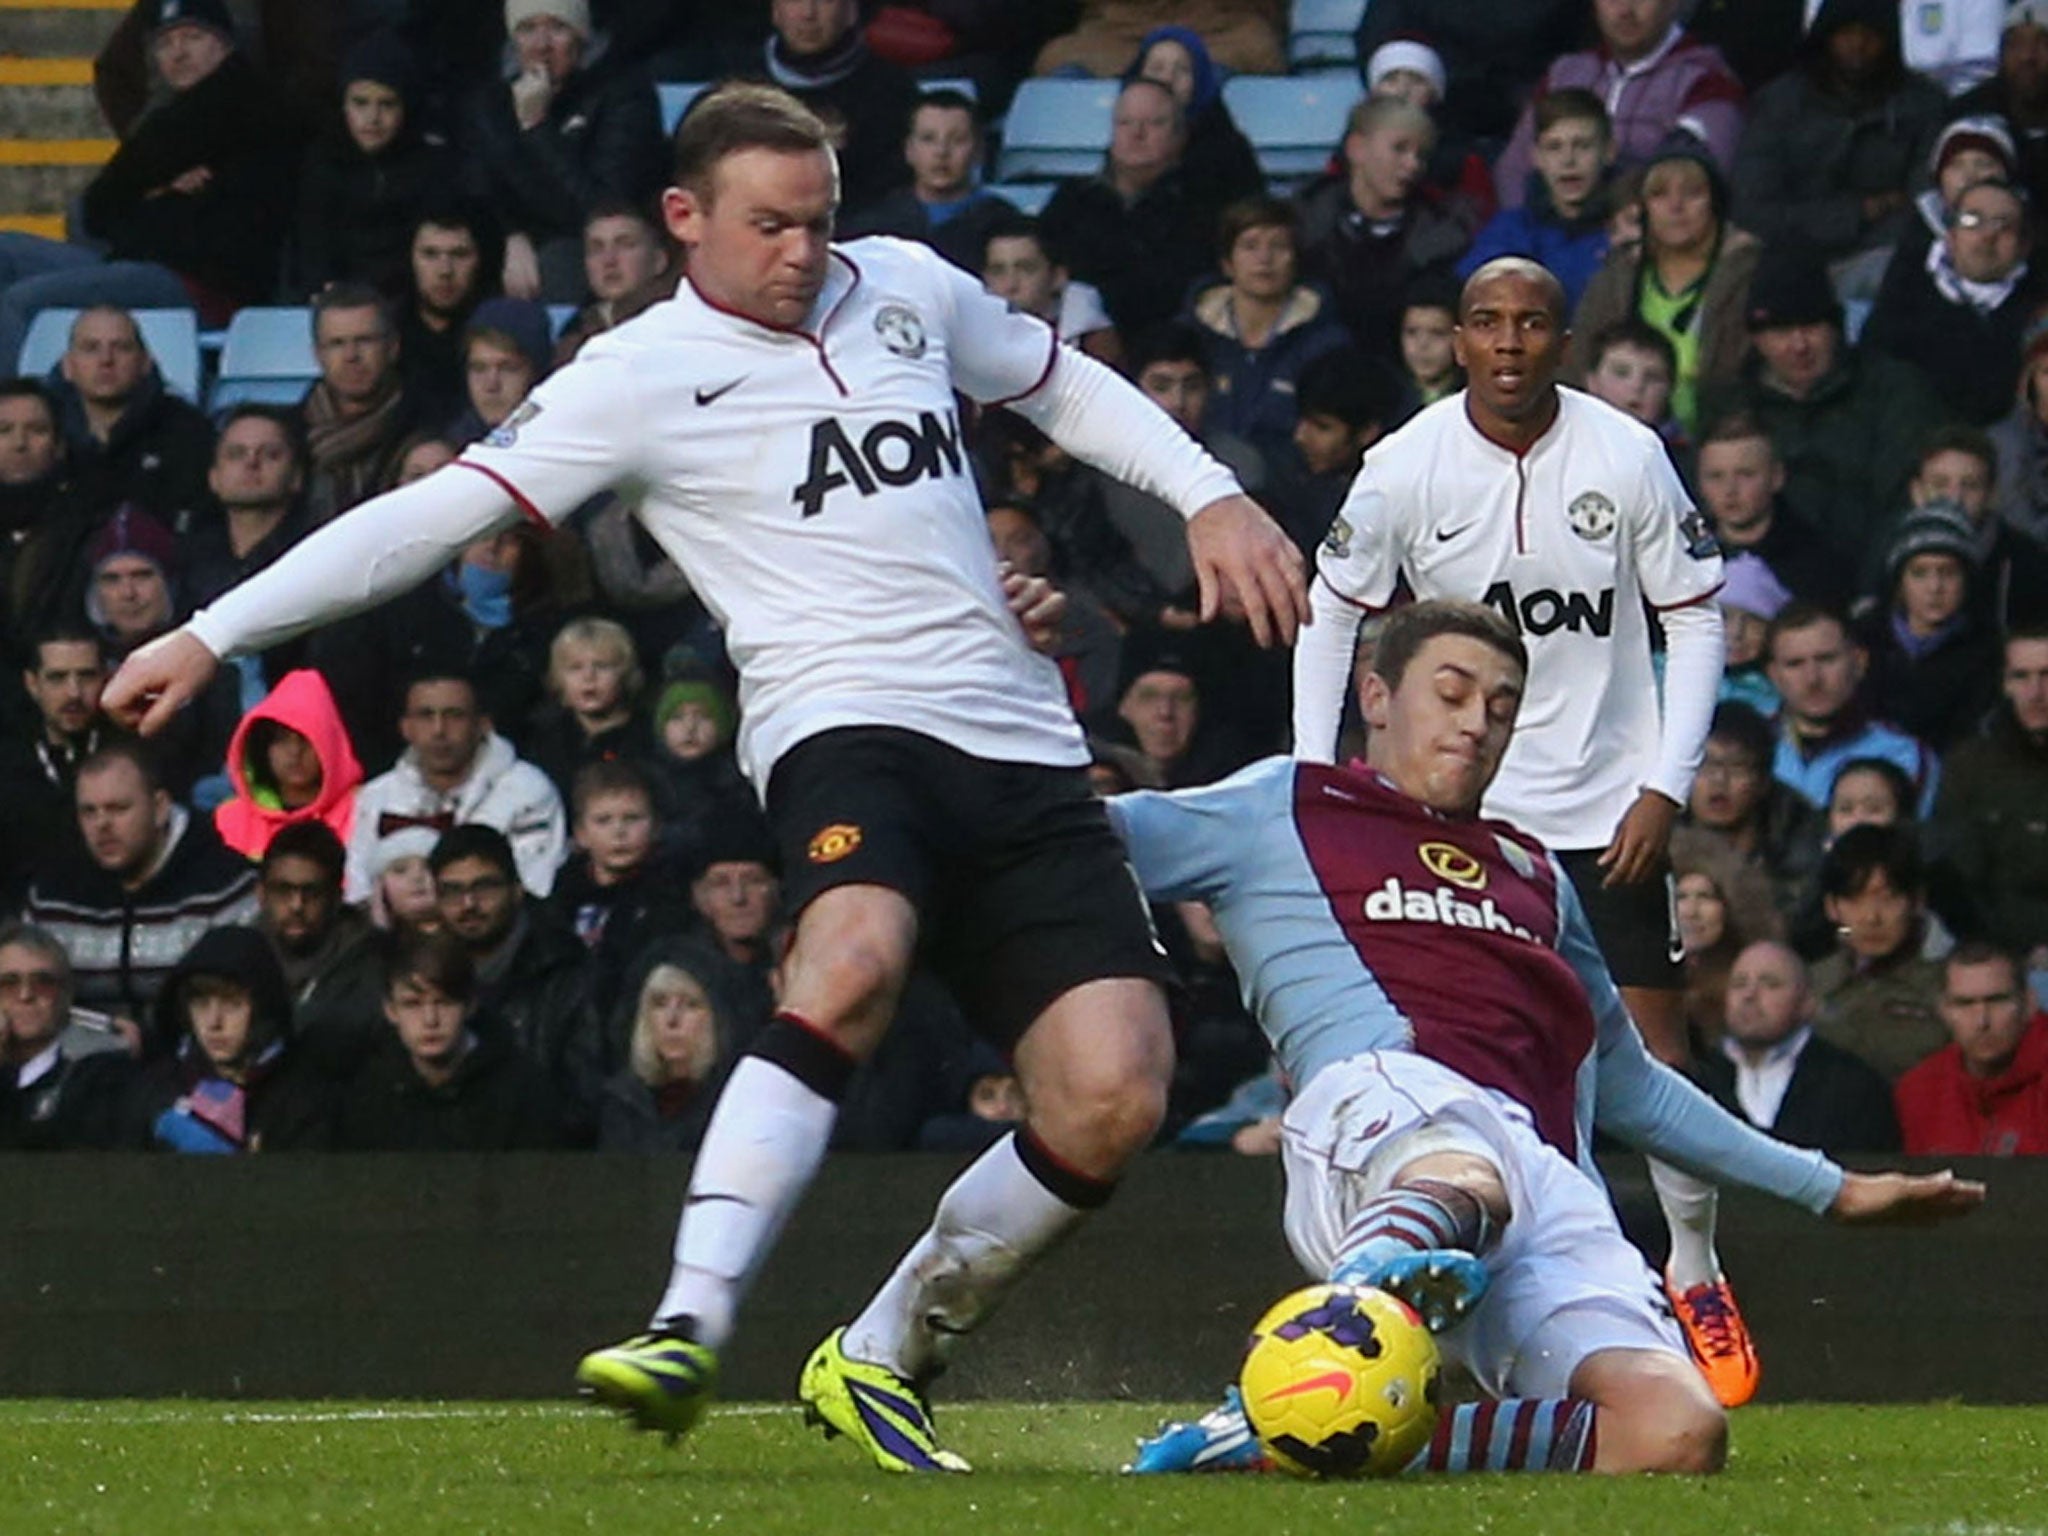 Wayne Rooney shoots for Manchester United in their win over Aston Villa